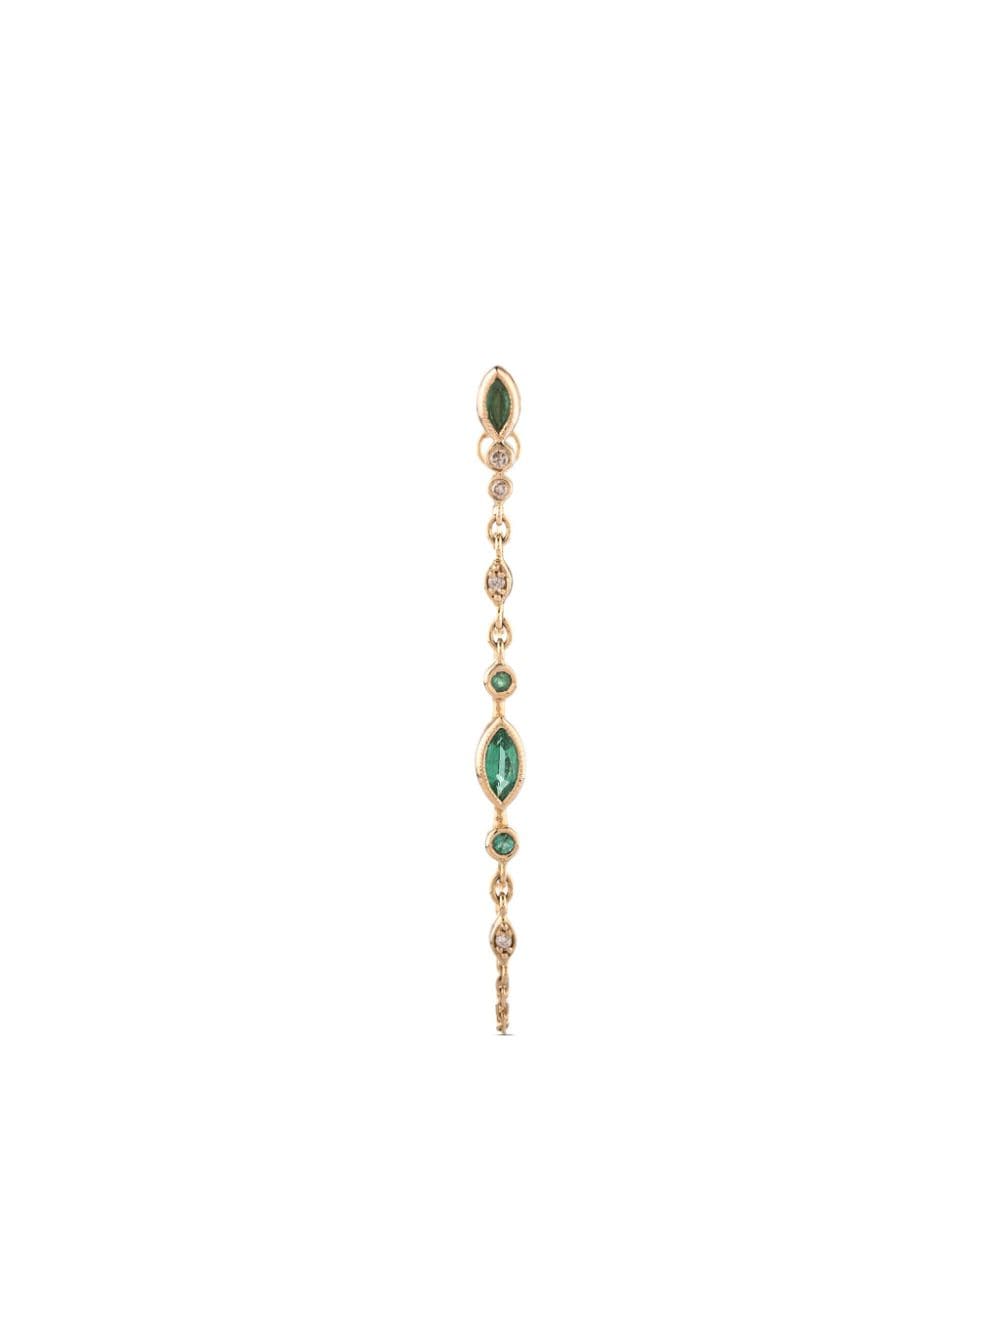 Celine Daoust 14kt yellow gold emerald and diamond drop earring von Celine Daoust